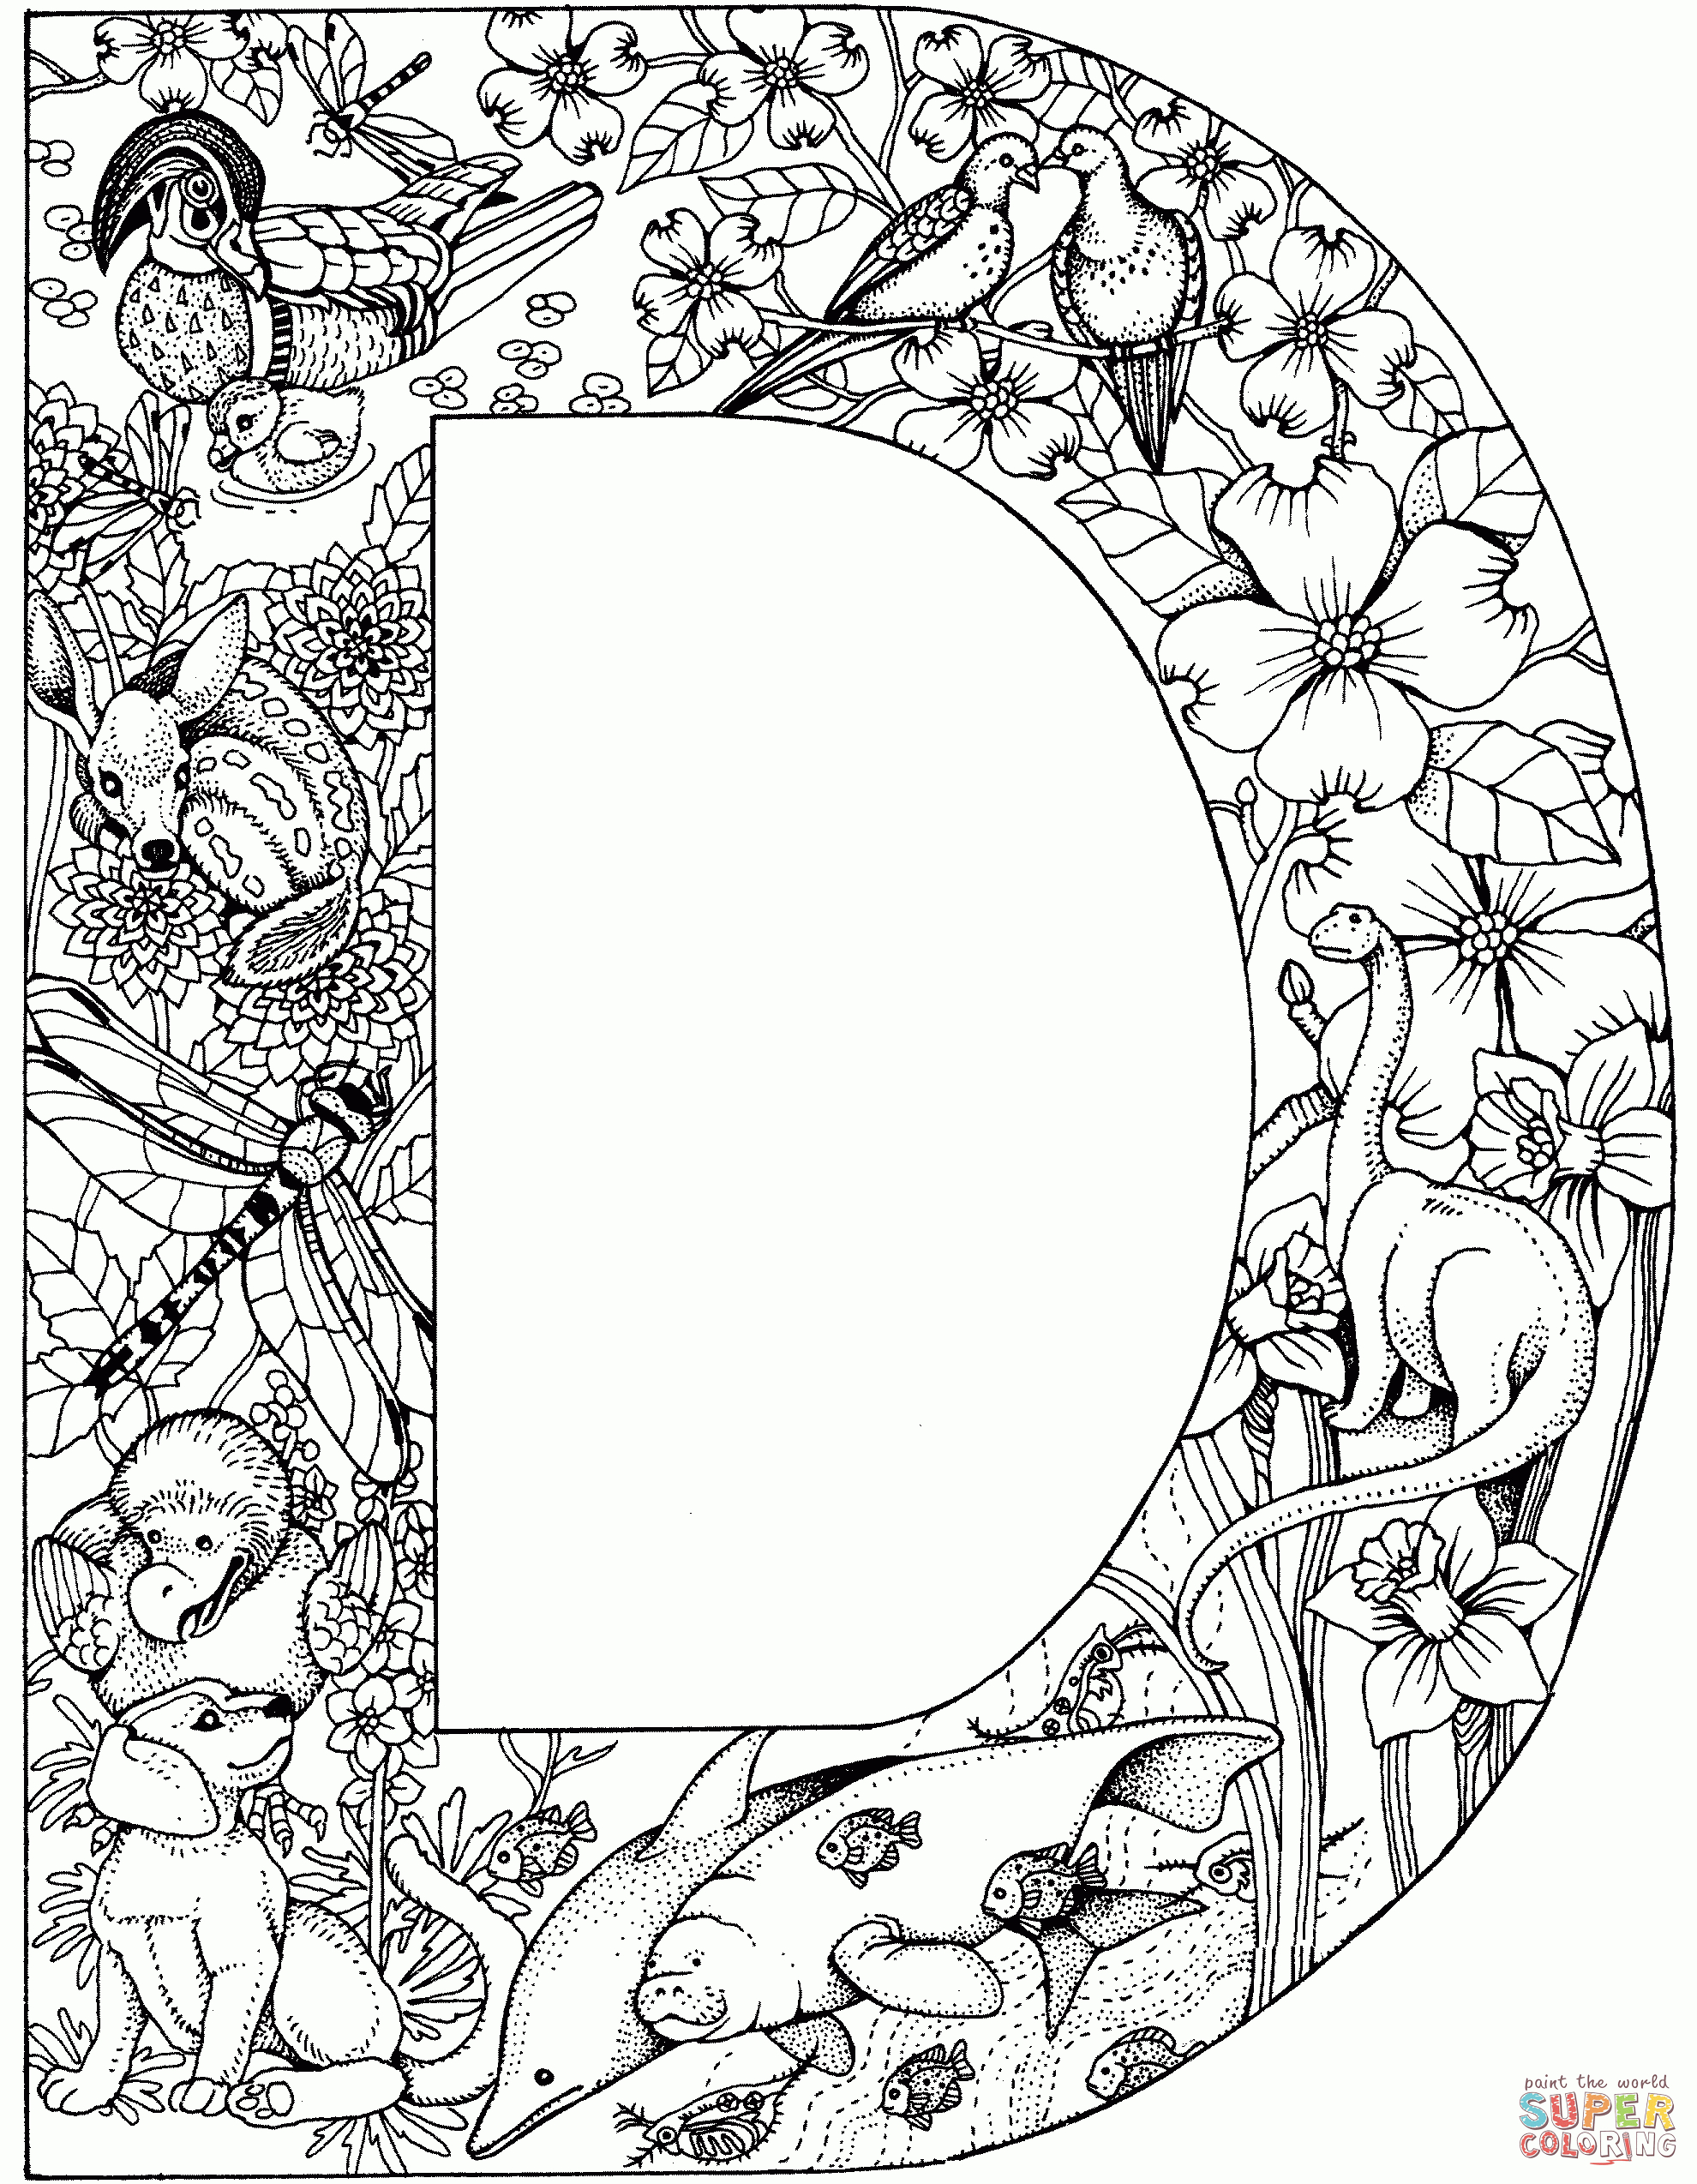 Coloring Pages : Coloring Pages Letter Page Free Printable Alphabet - Free Printable Alphabet Letters To Color